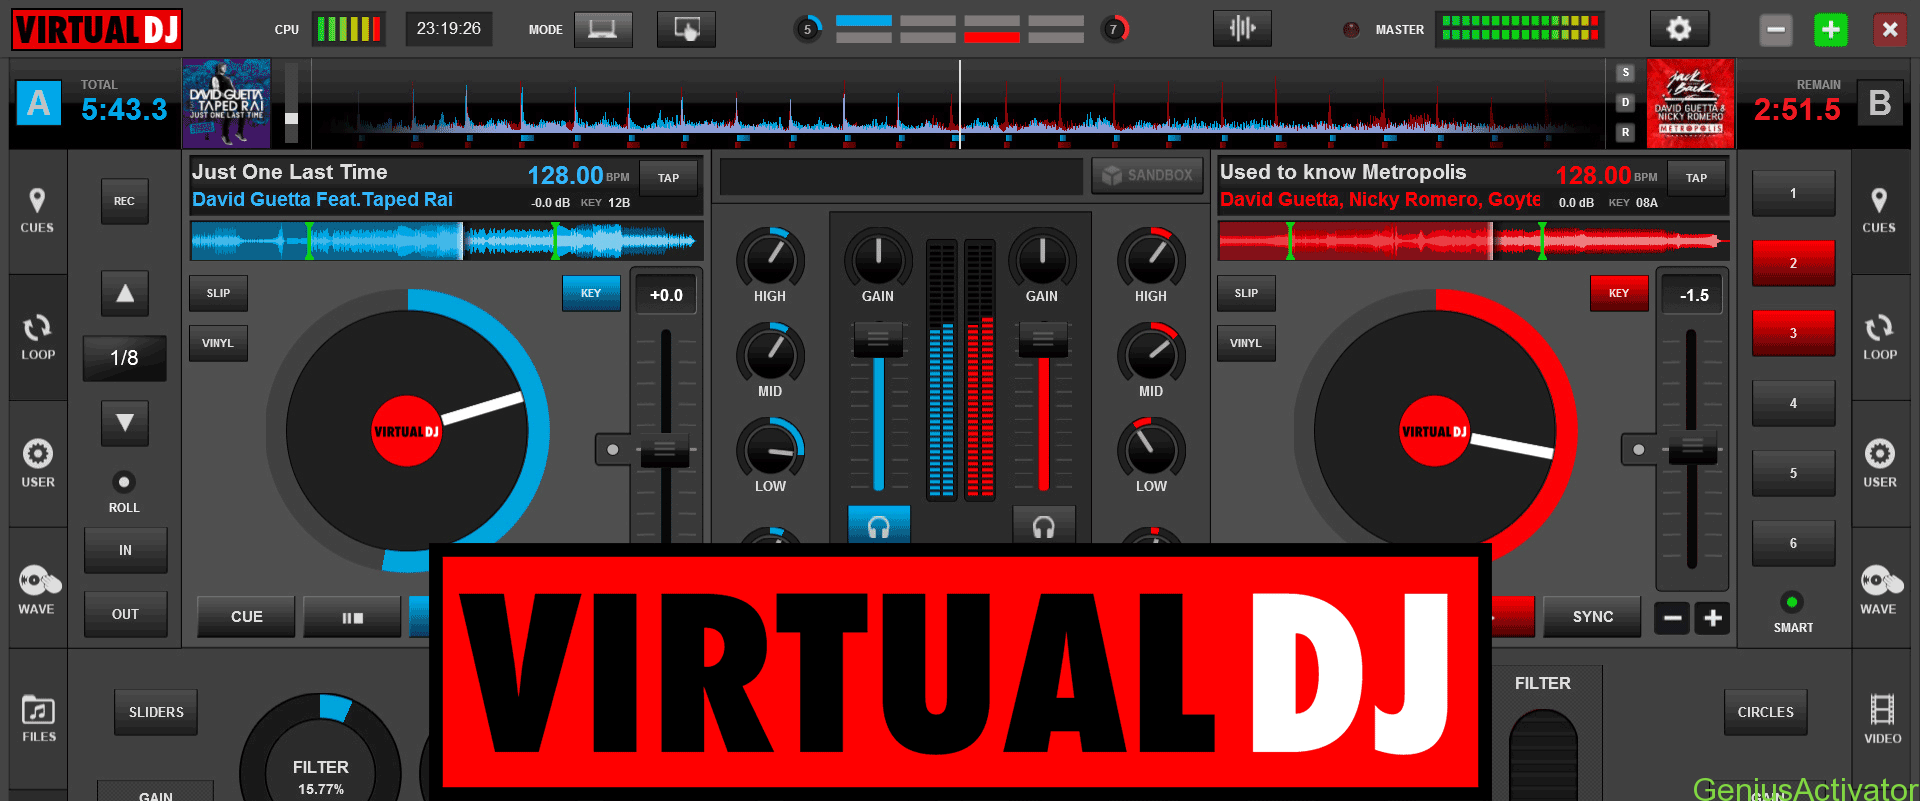 How to open a playlist in virtual dj on mac asking permissions